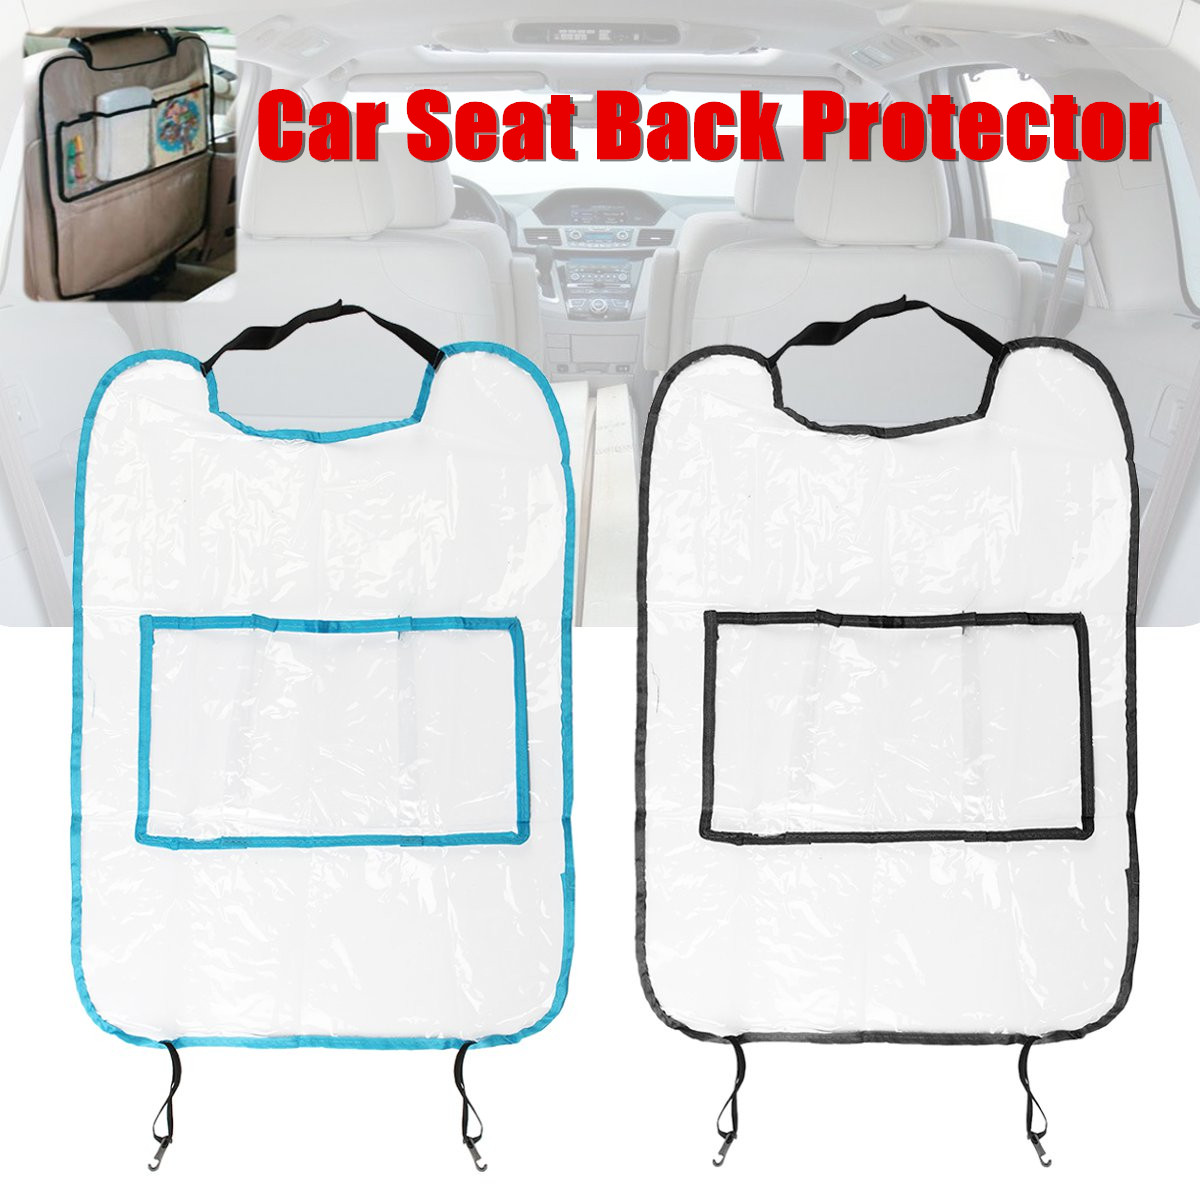 Car-Seat-Back-Protector-Cleaning-Cover-Children-Baby-Kick-Mat-Storage-Bag-1427837